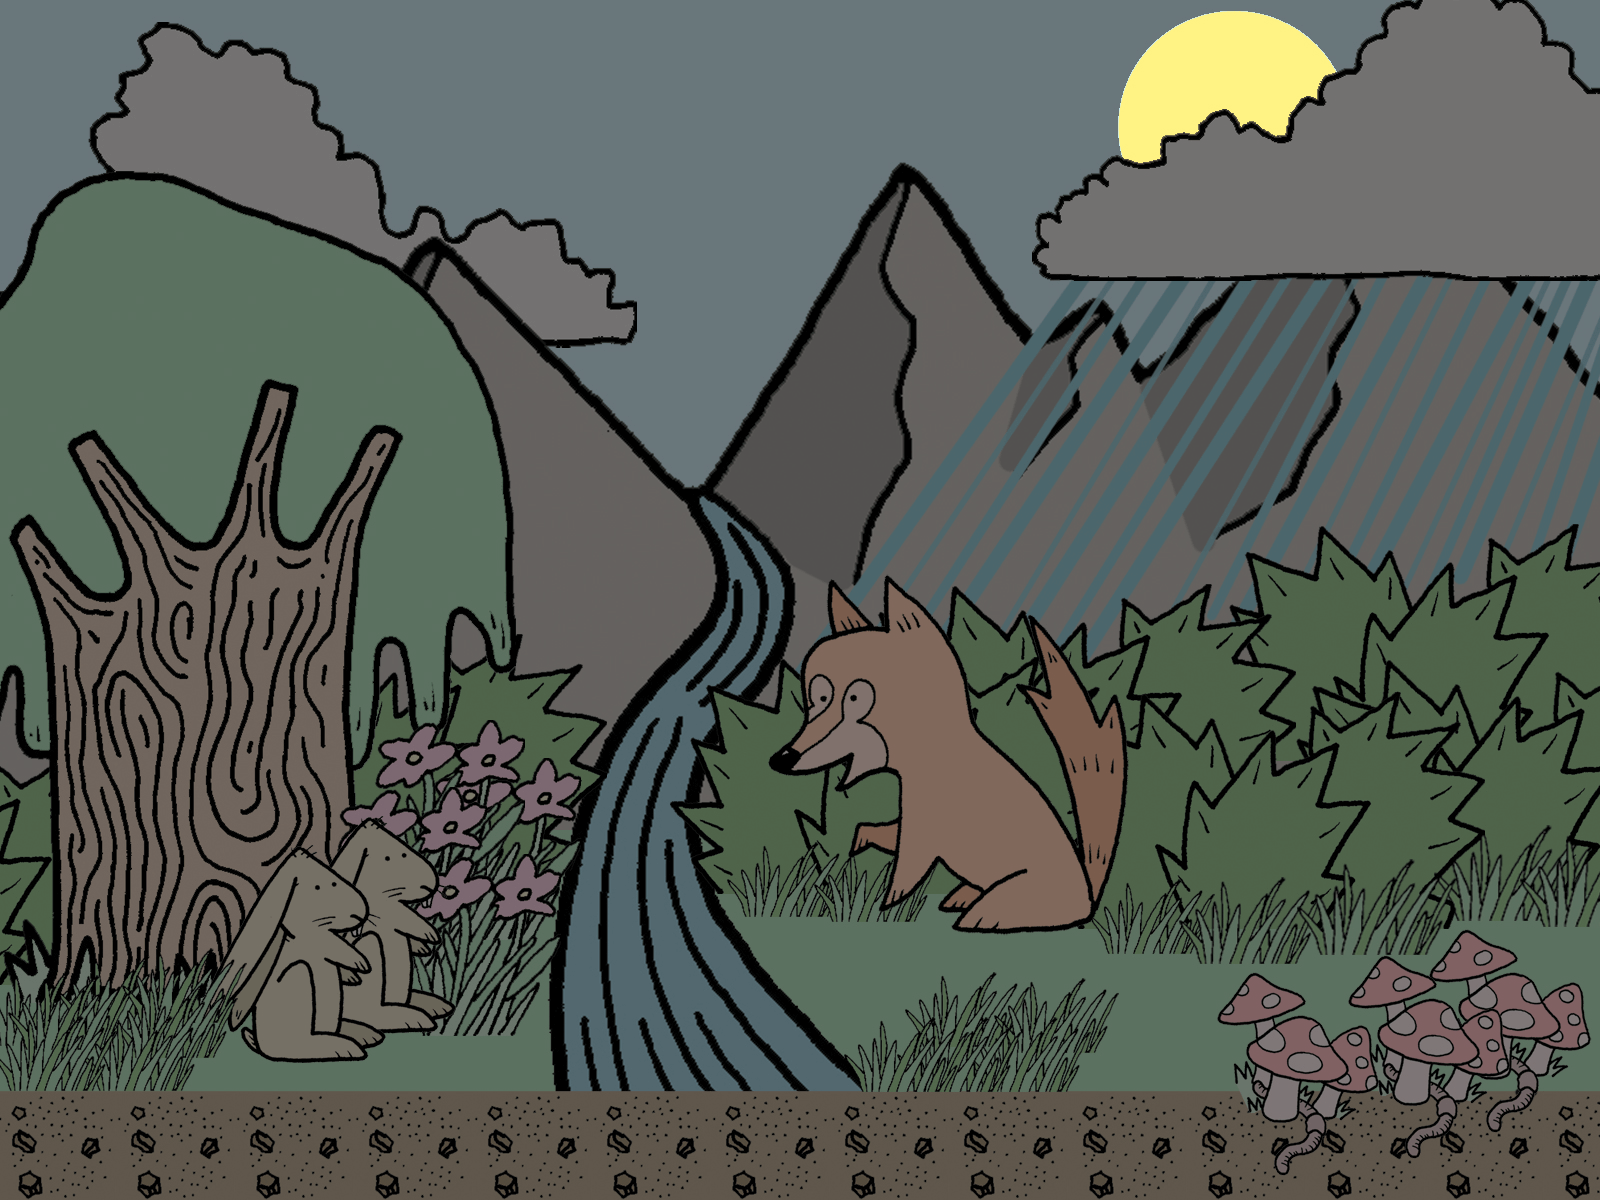 Cartoon representation of a forest with plants and animals, highlighting an analogy between the sun and writing program administrator support.